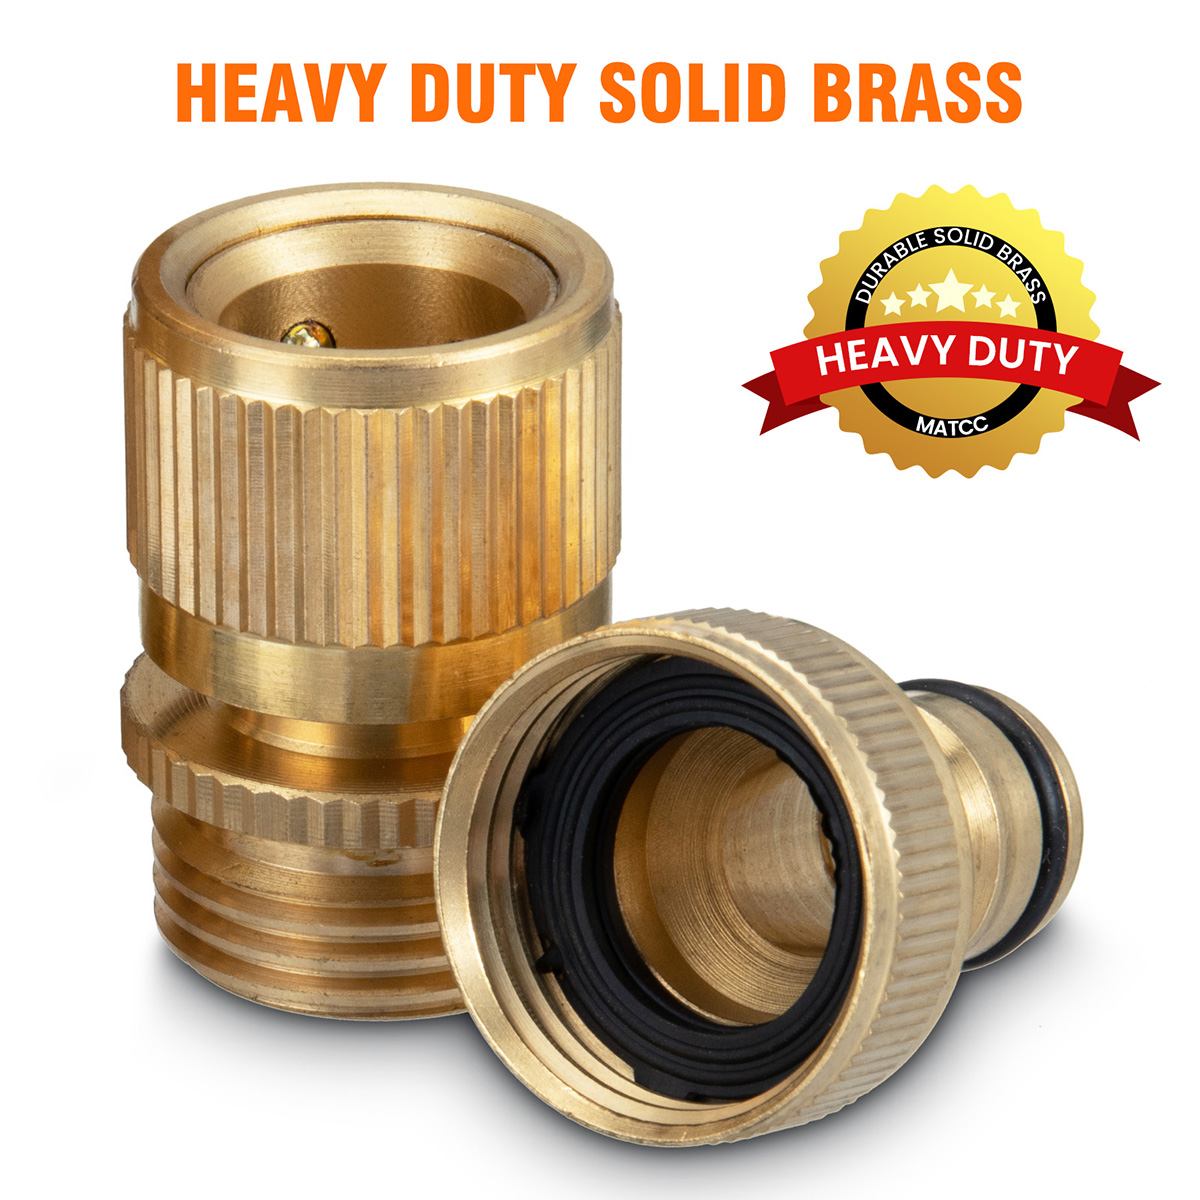 MATCC-Brass-Inner-Teeth-Quick-Connector-Set-34quot-GHT-Brass-Garden-Hose-Quick-Connector-With-Washer-1898352-1